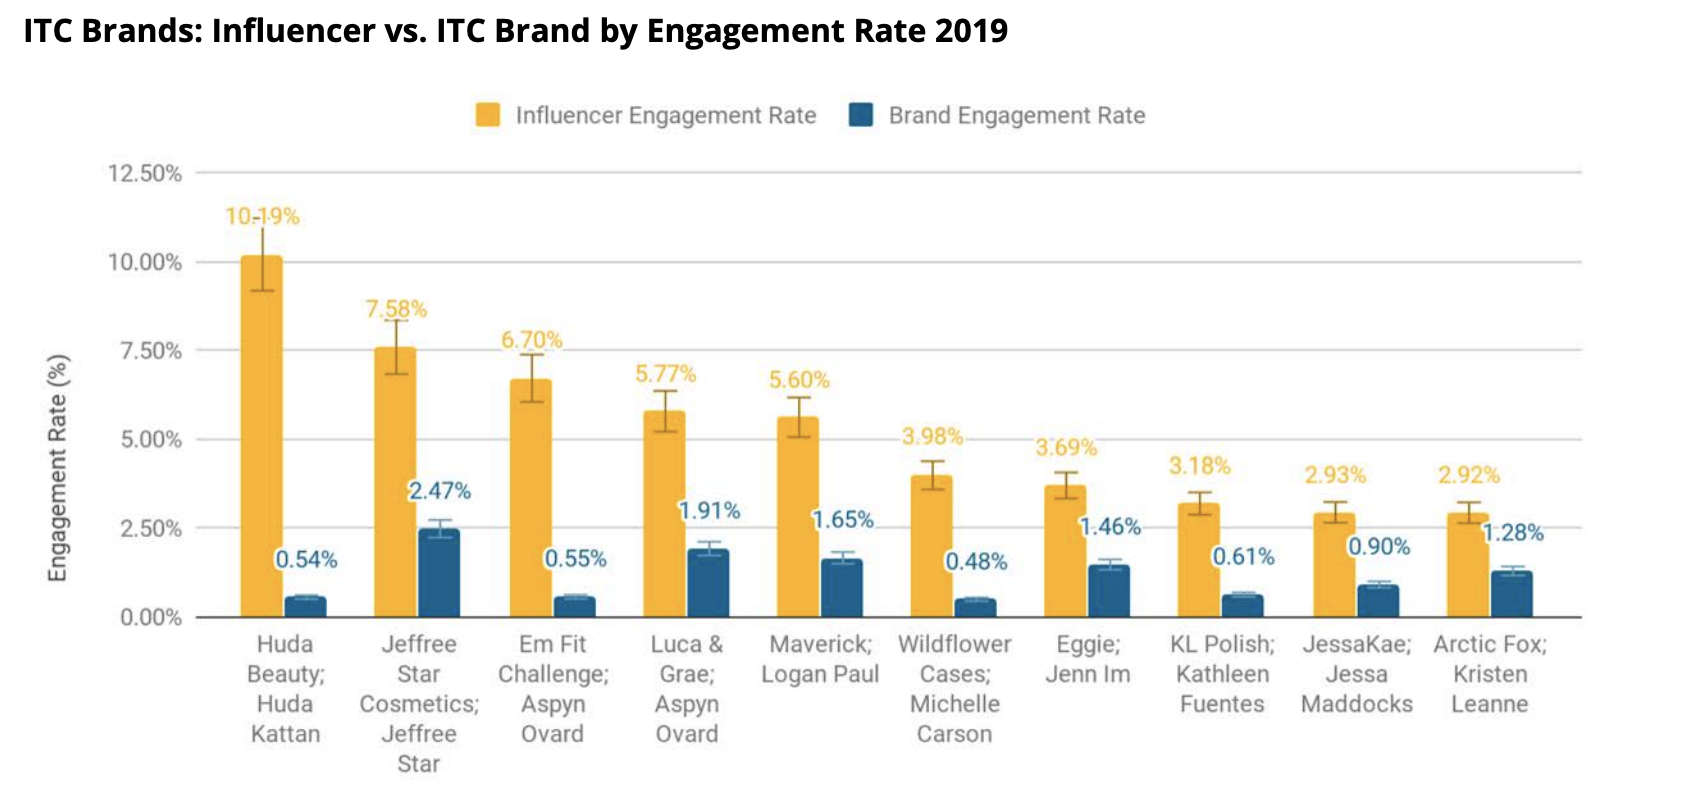 ITC brands follower count